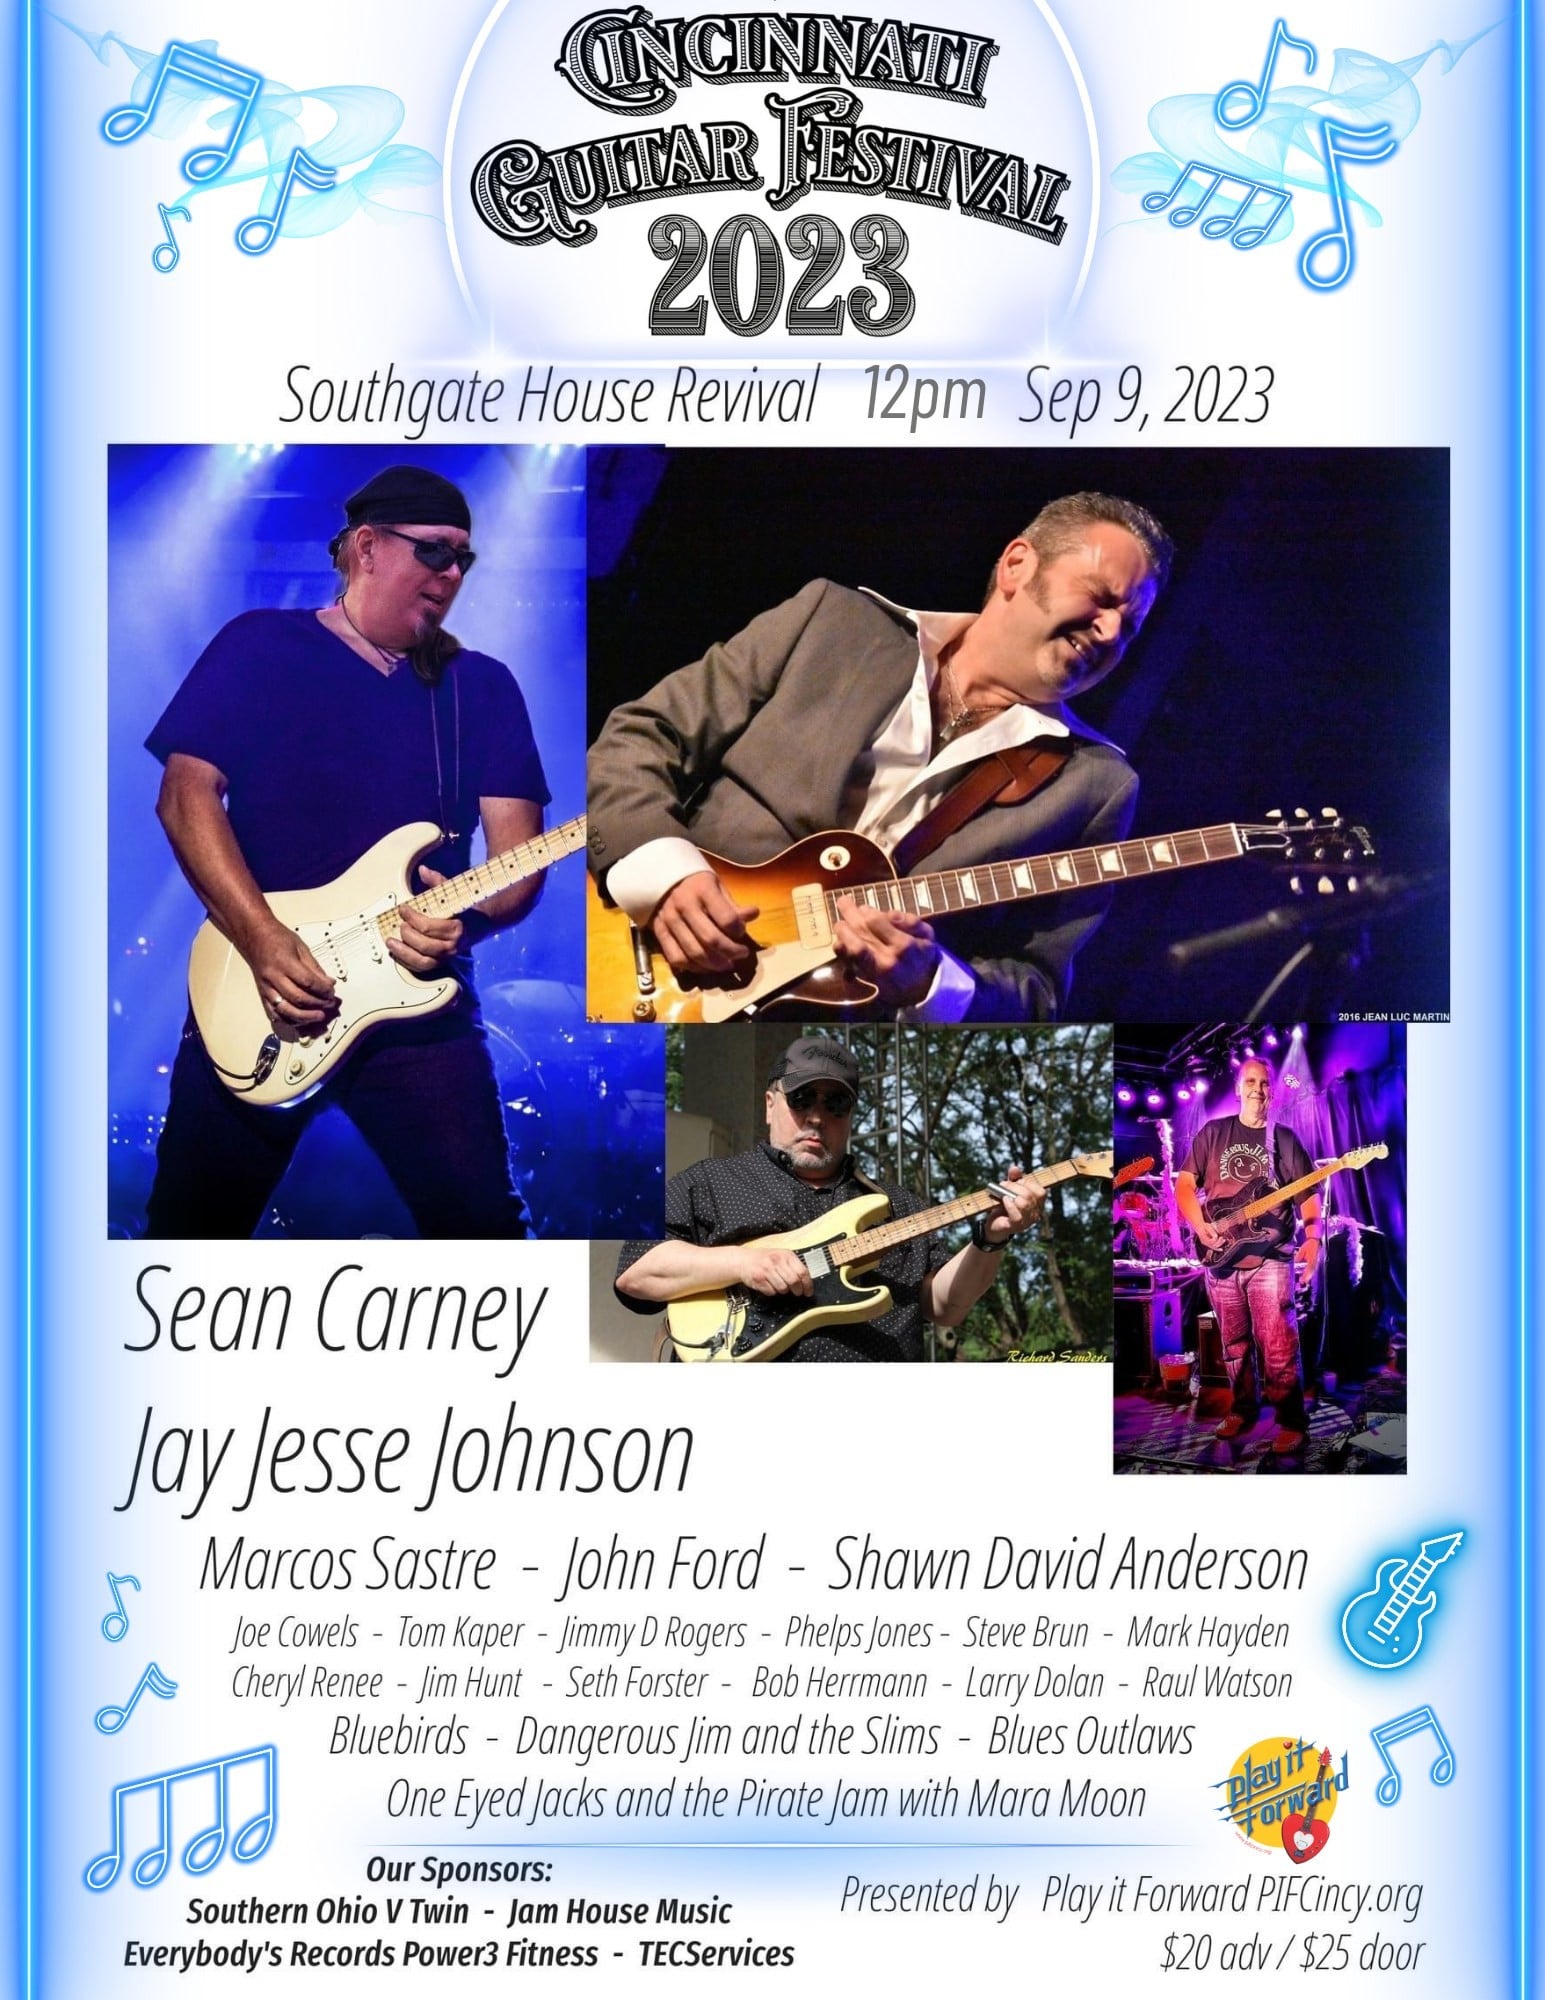 
The 2023 Cincinnati Guitar Festival - featuring great guitarists, with proceeds benefiting the local music community!

Come join us for a great night!